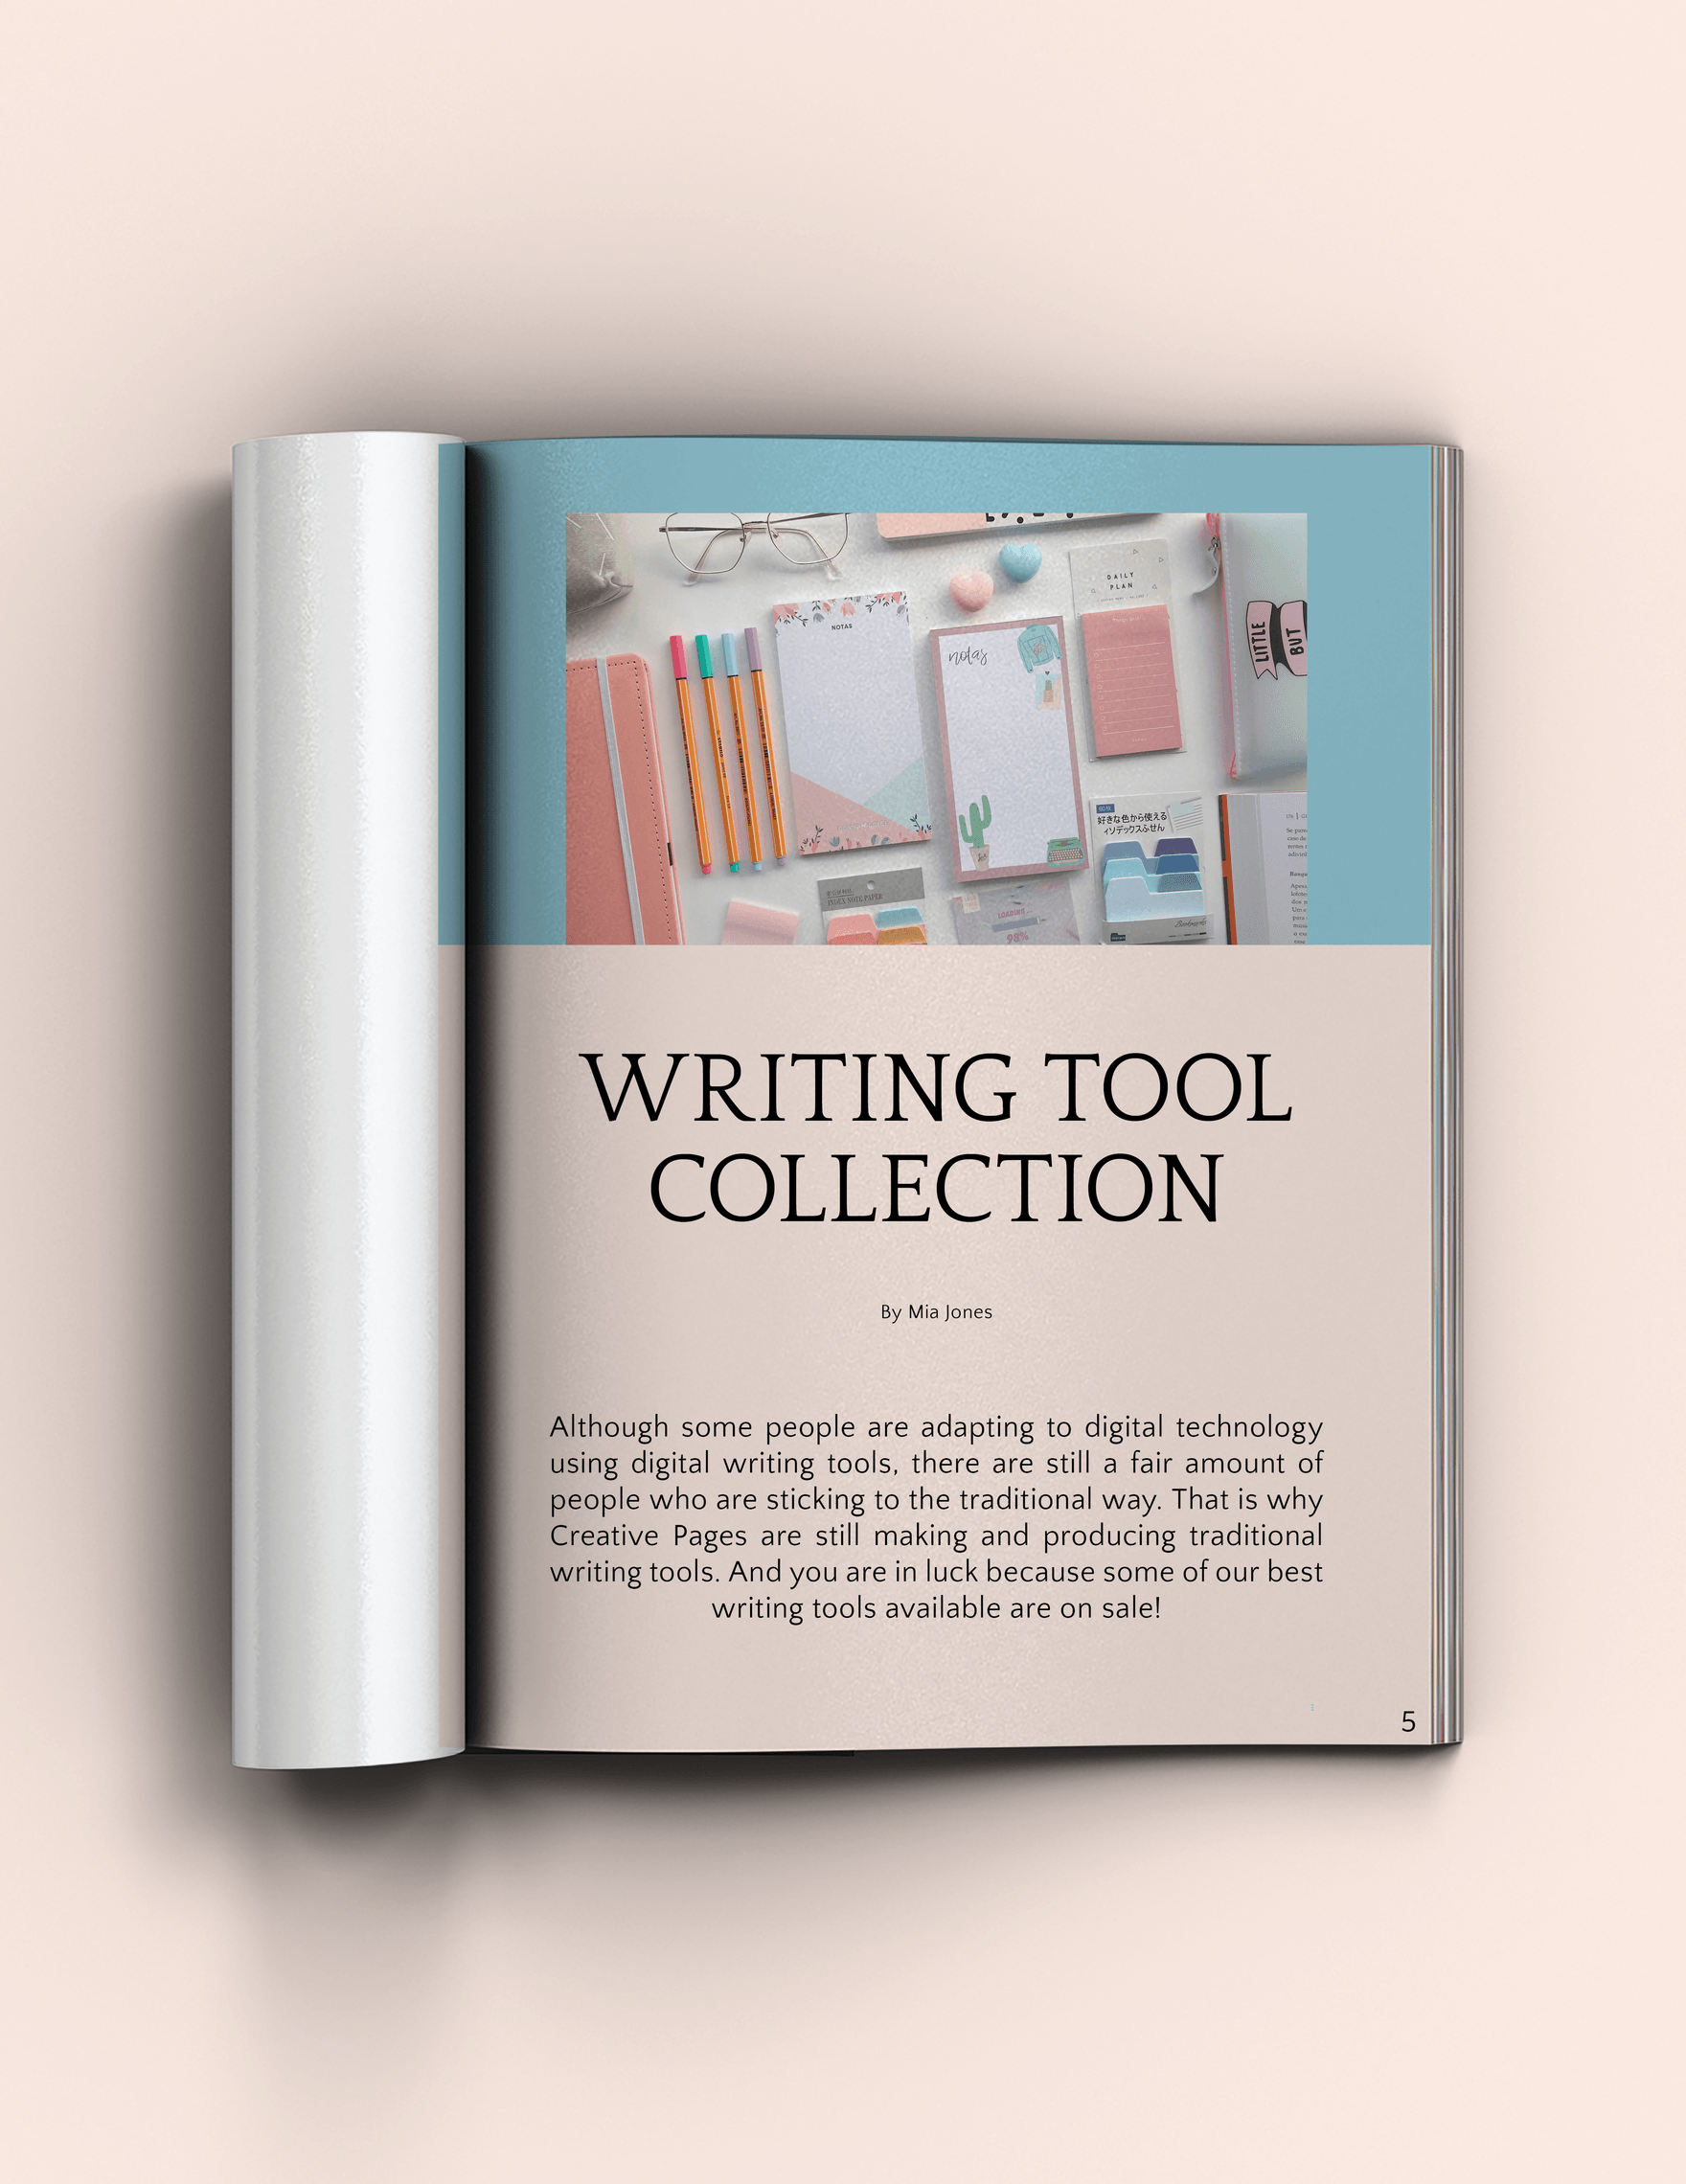 Stationery Supply Catalog Template